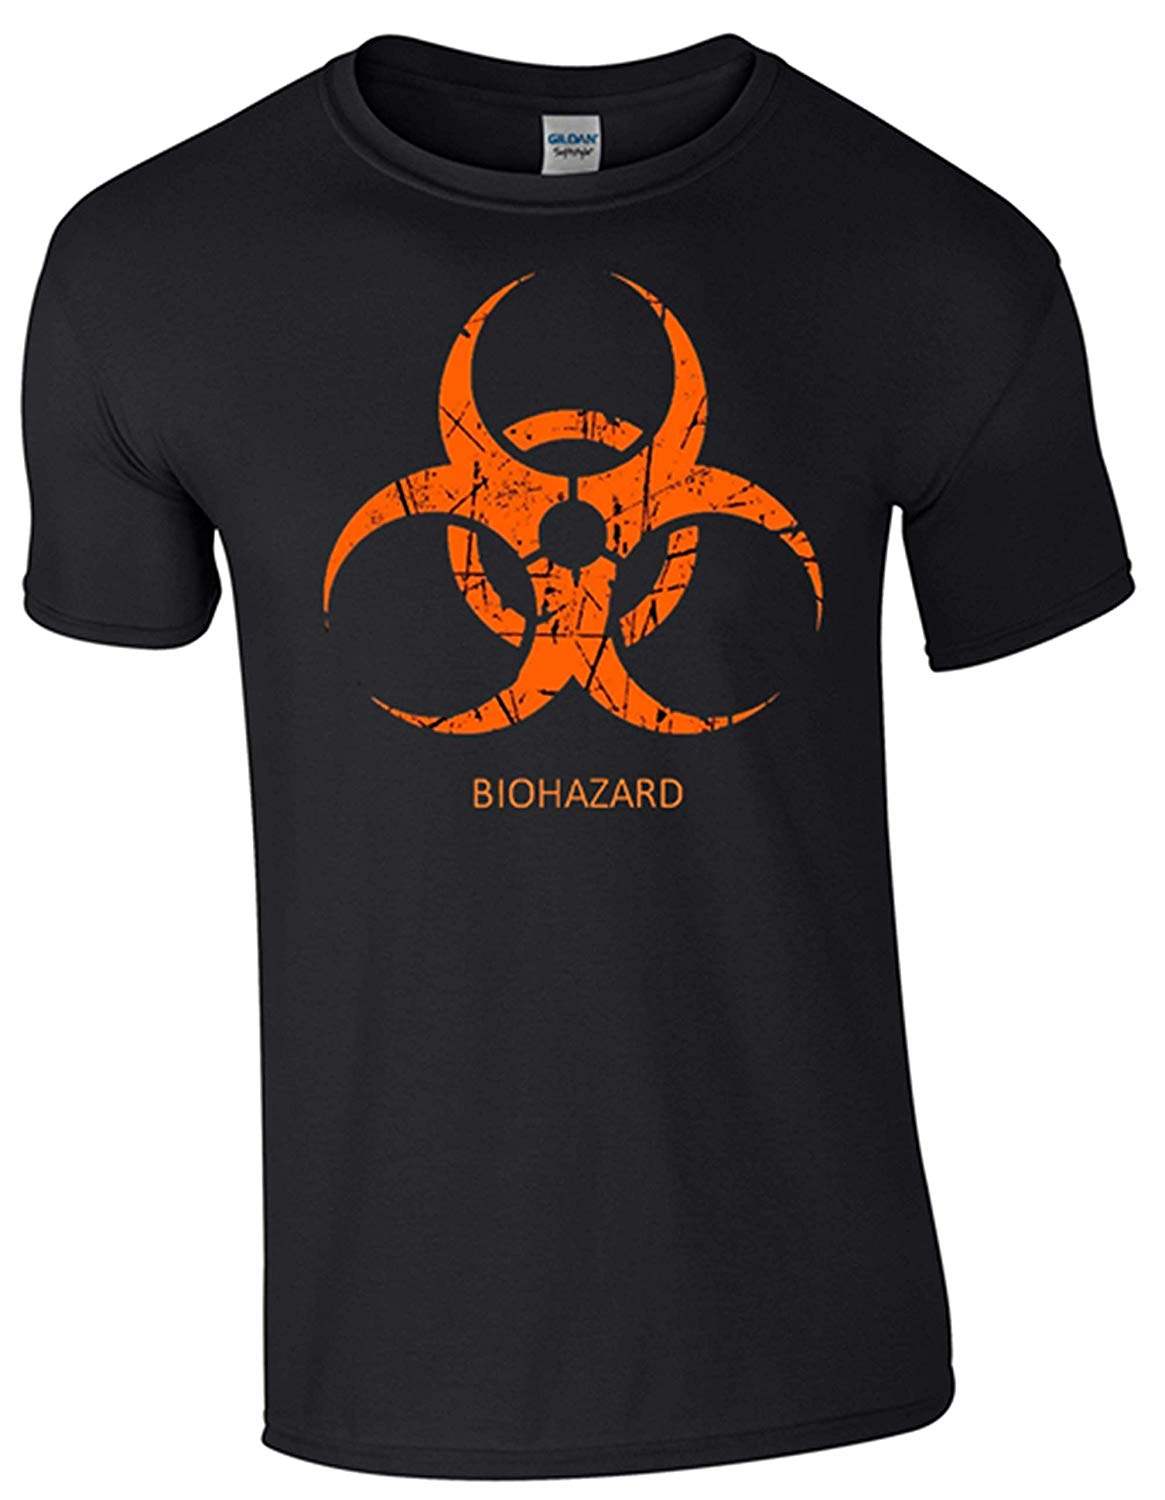 Army 1157 Kit Biohazard T-Shirt - Army 1157 kit XL Army 1157 Kit Veterans Owned Business